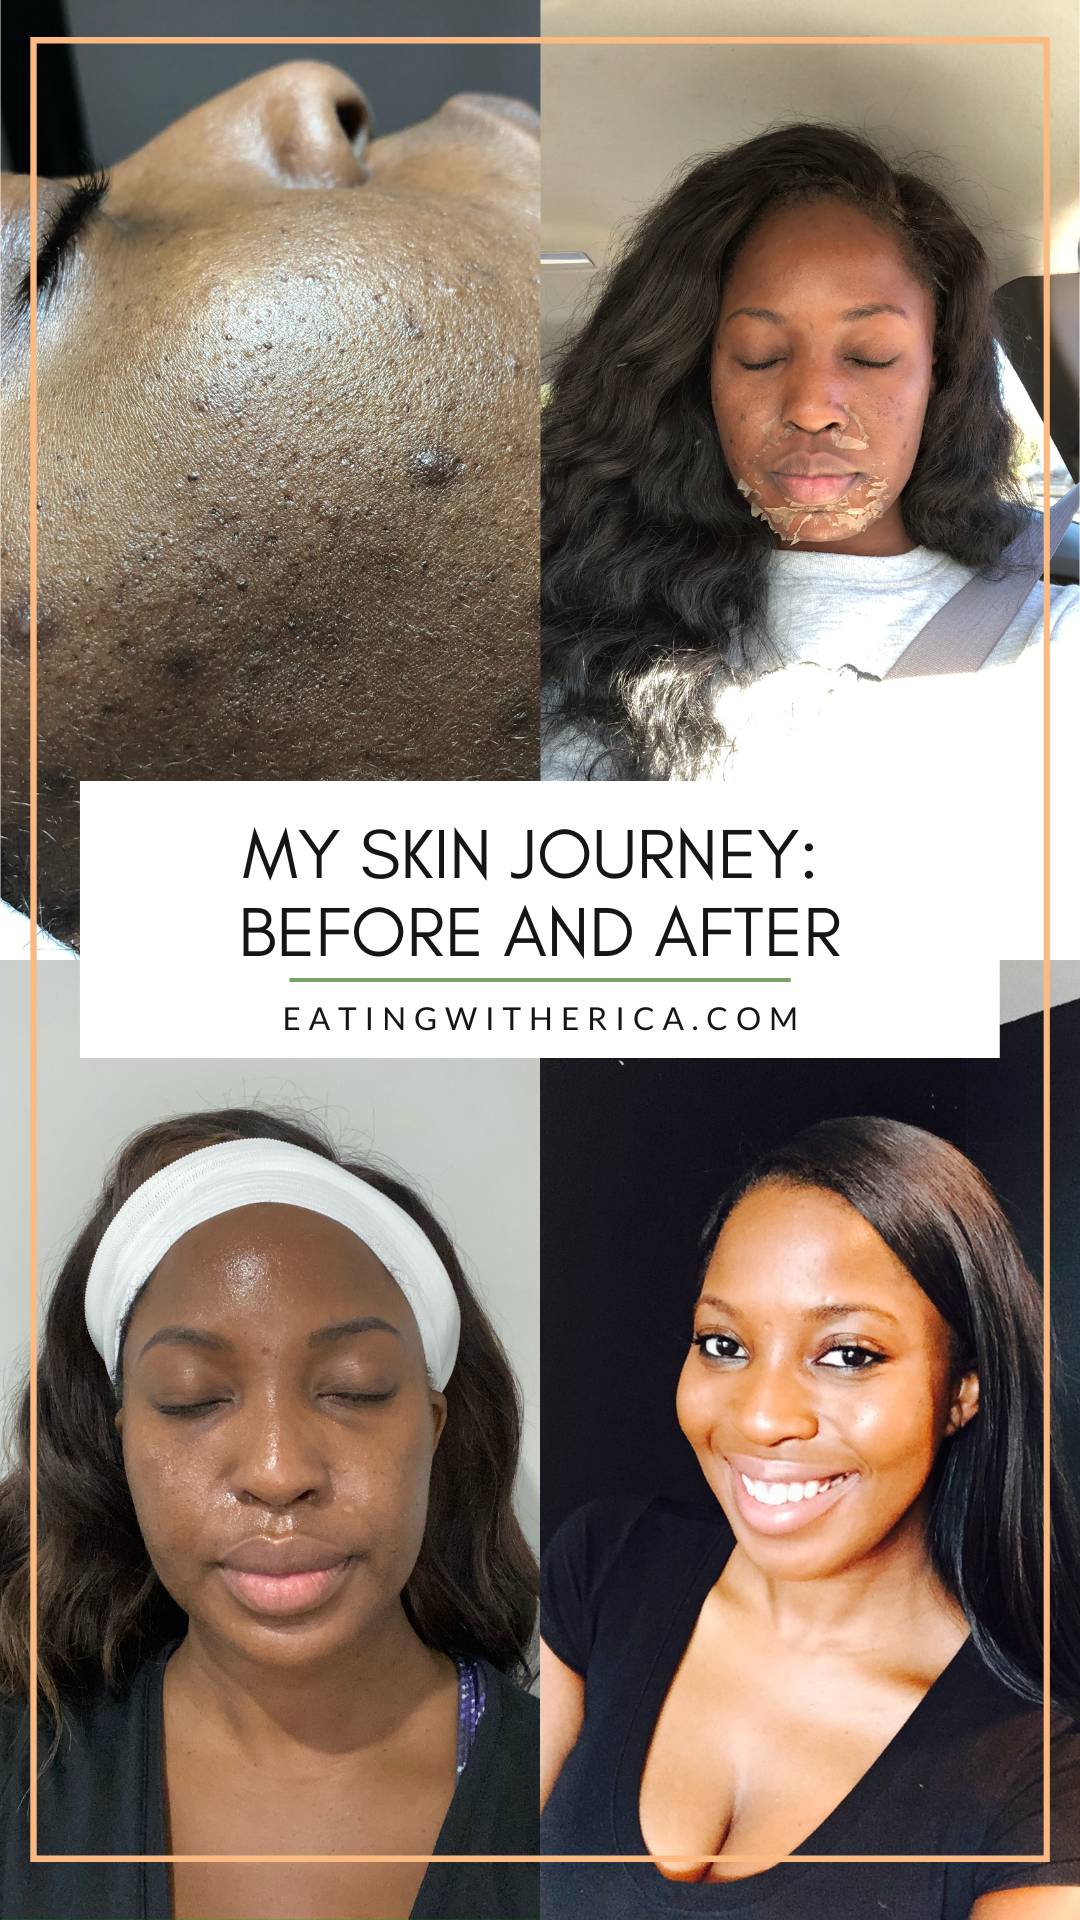 Currently on a skin journey? Join Atlanta Lifestyle Blogger Eating with Erica as she shares her personal skin journey and what she did HERE!